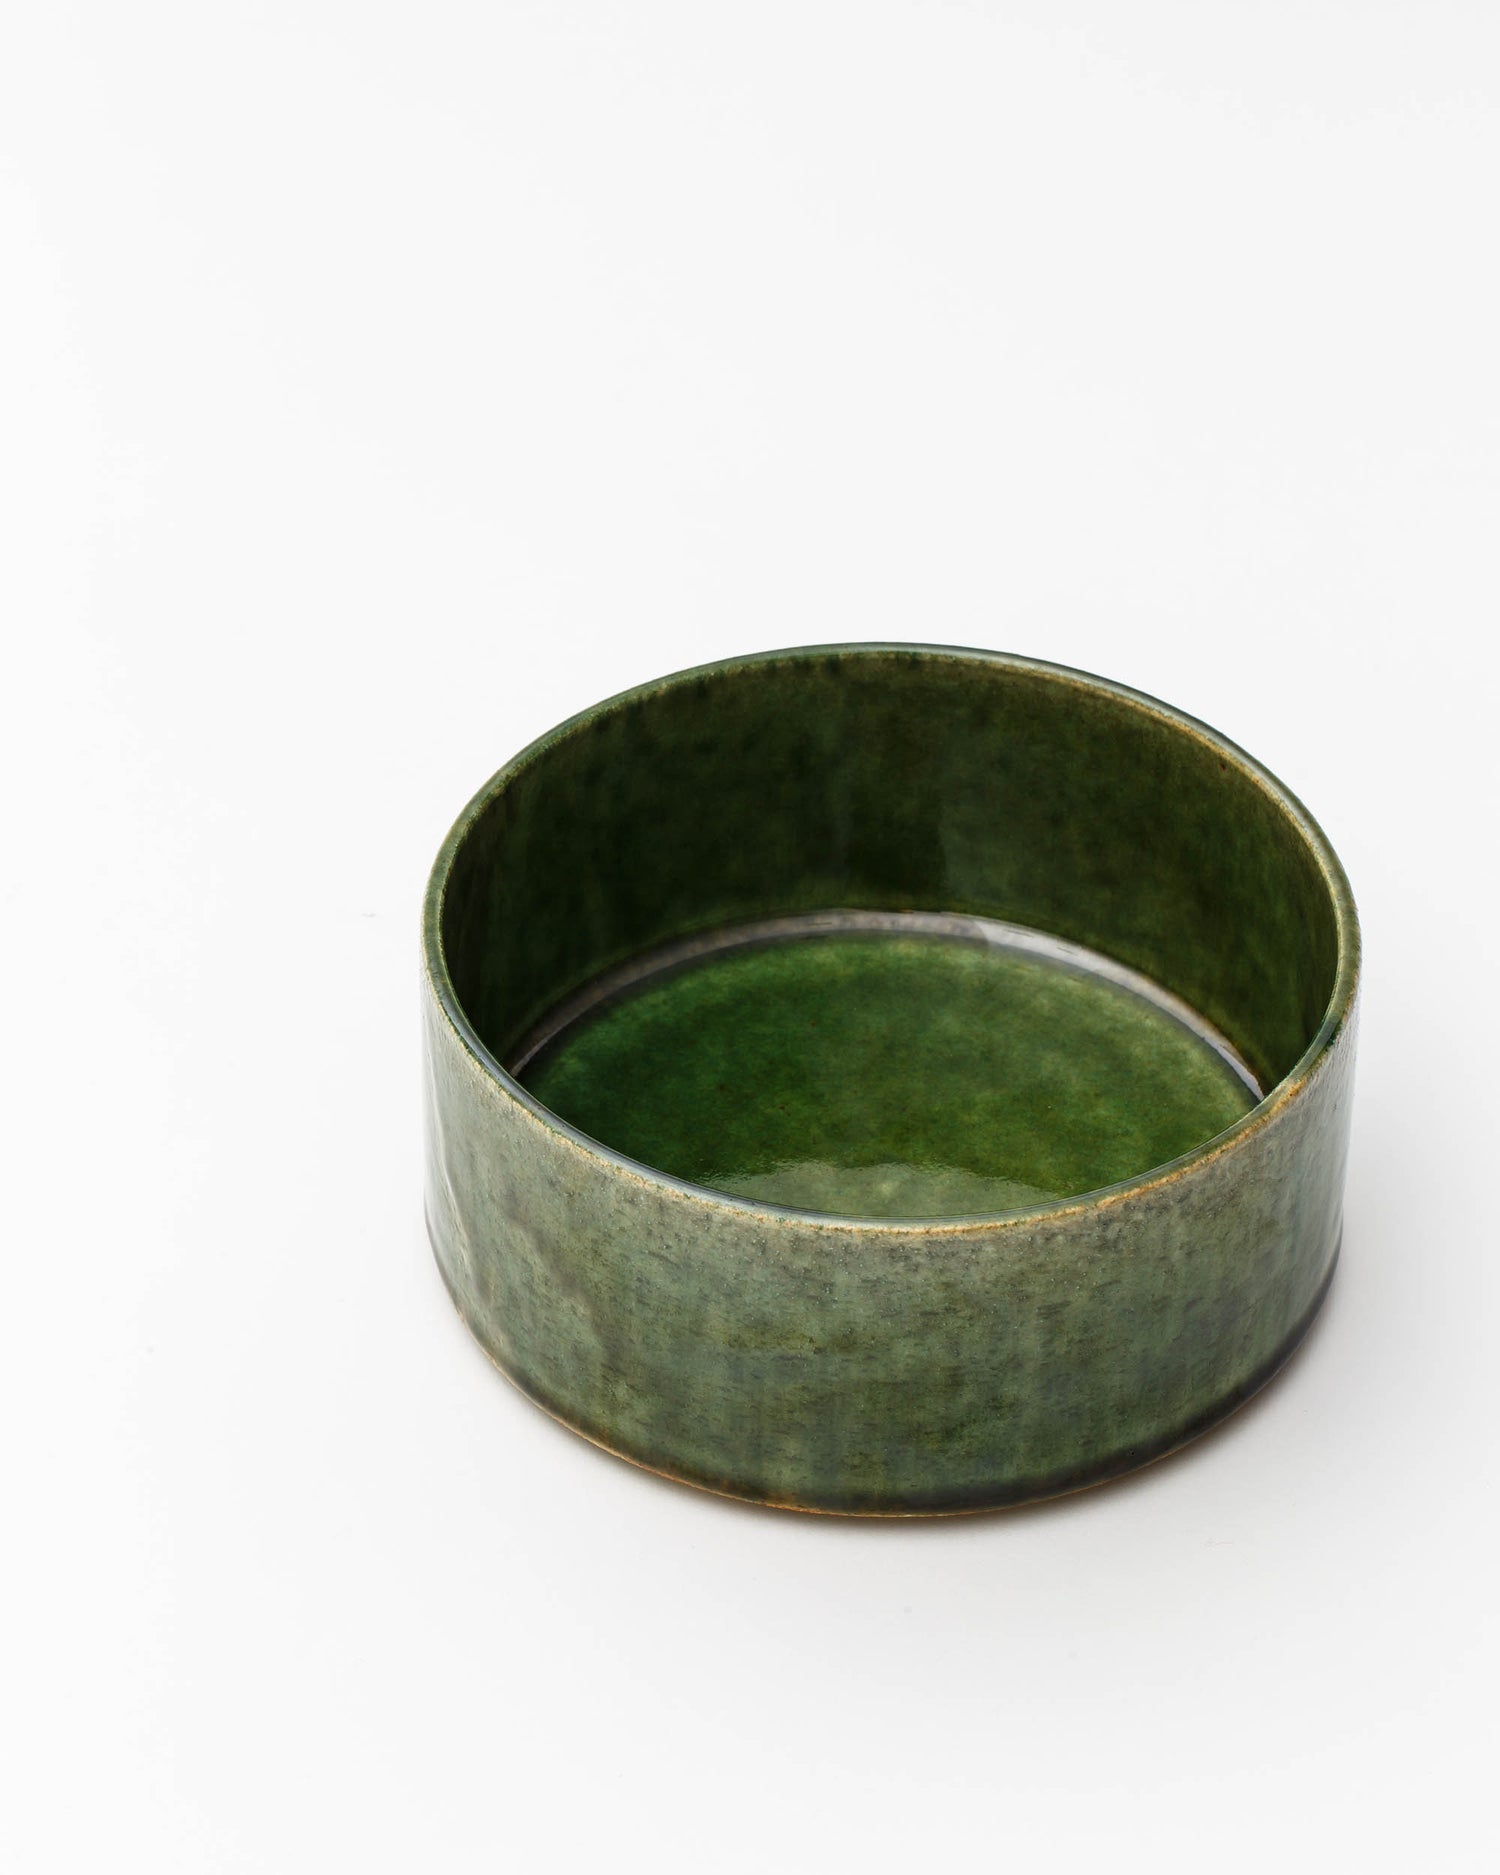 Image looking into small ceramic oribe bowl with deep green glaze by Time and Style against white-gray background.